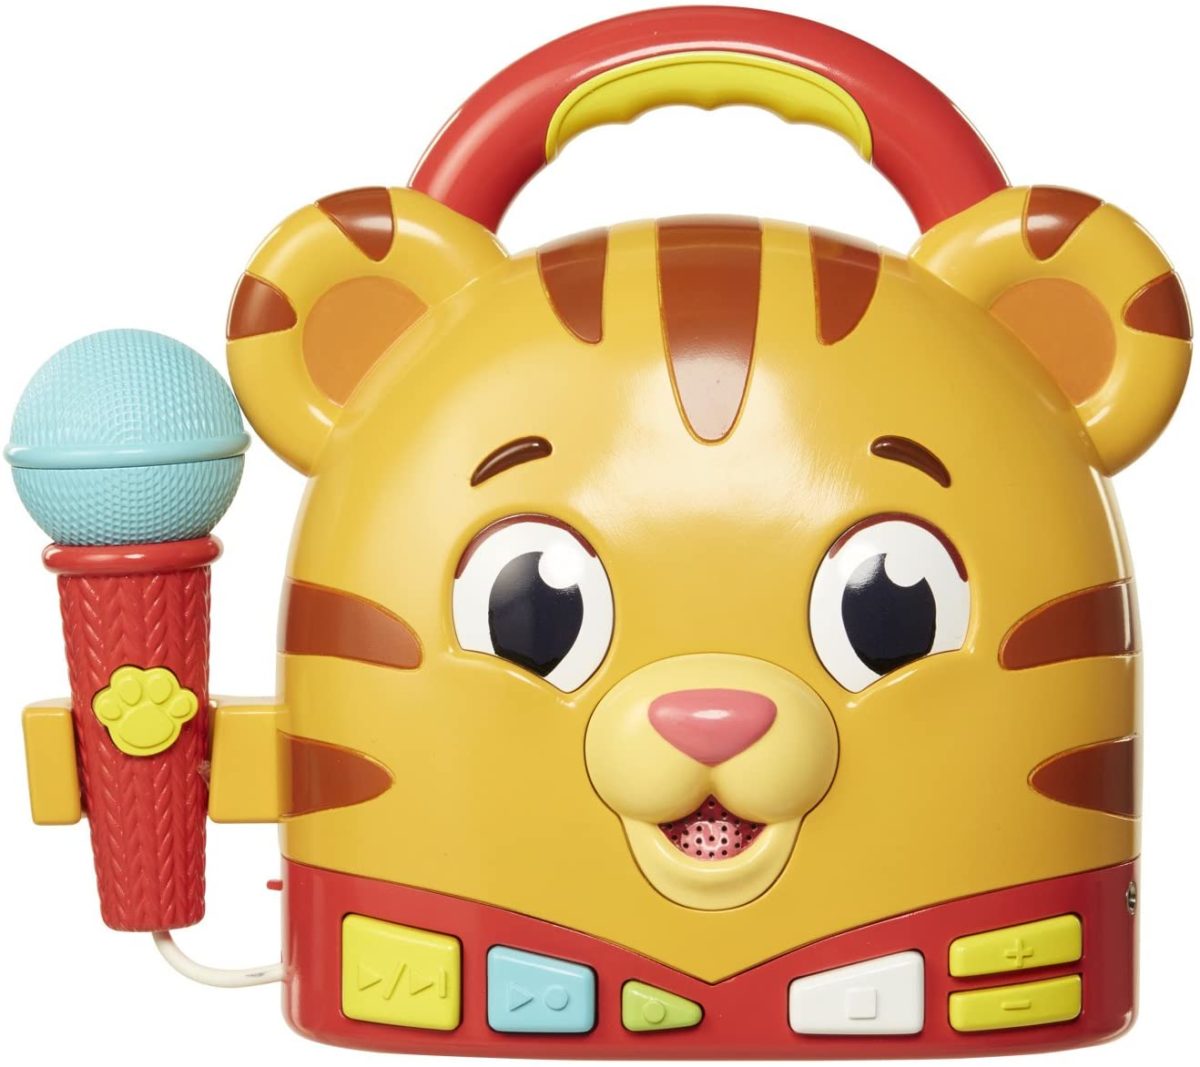 Toys for Toddlers: Here Are 35 Gifts For Every Toddler In Your Life